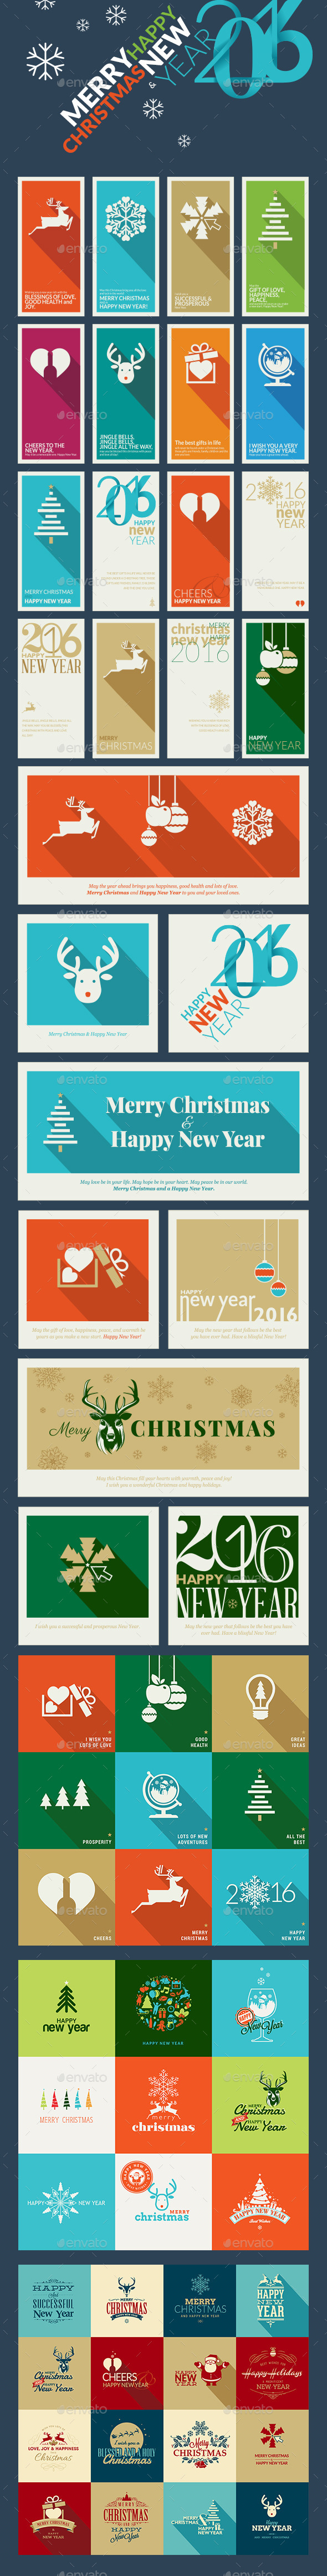 Flat Design Christmas and New Year Greeting Cards